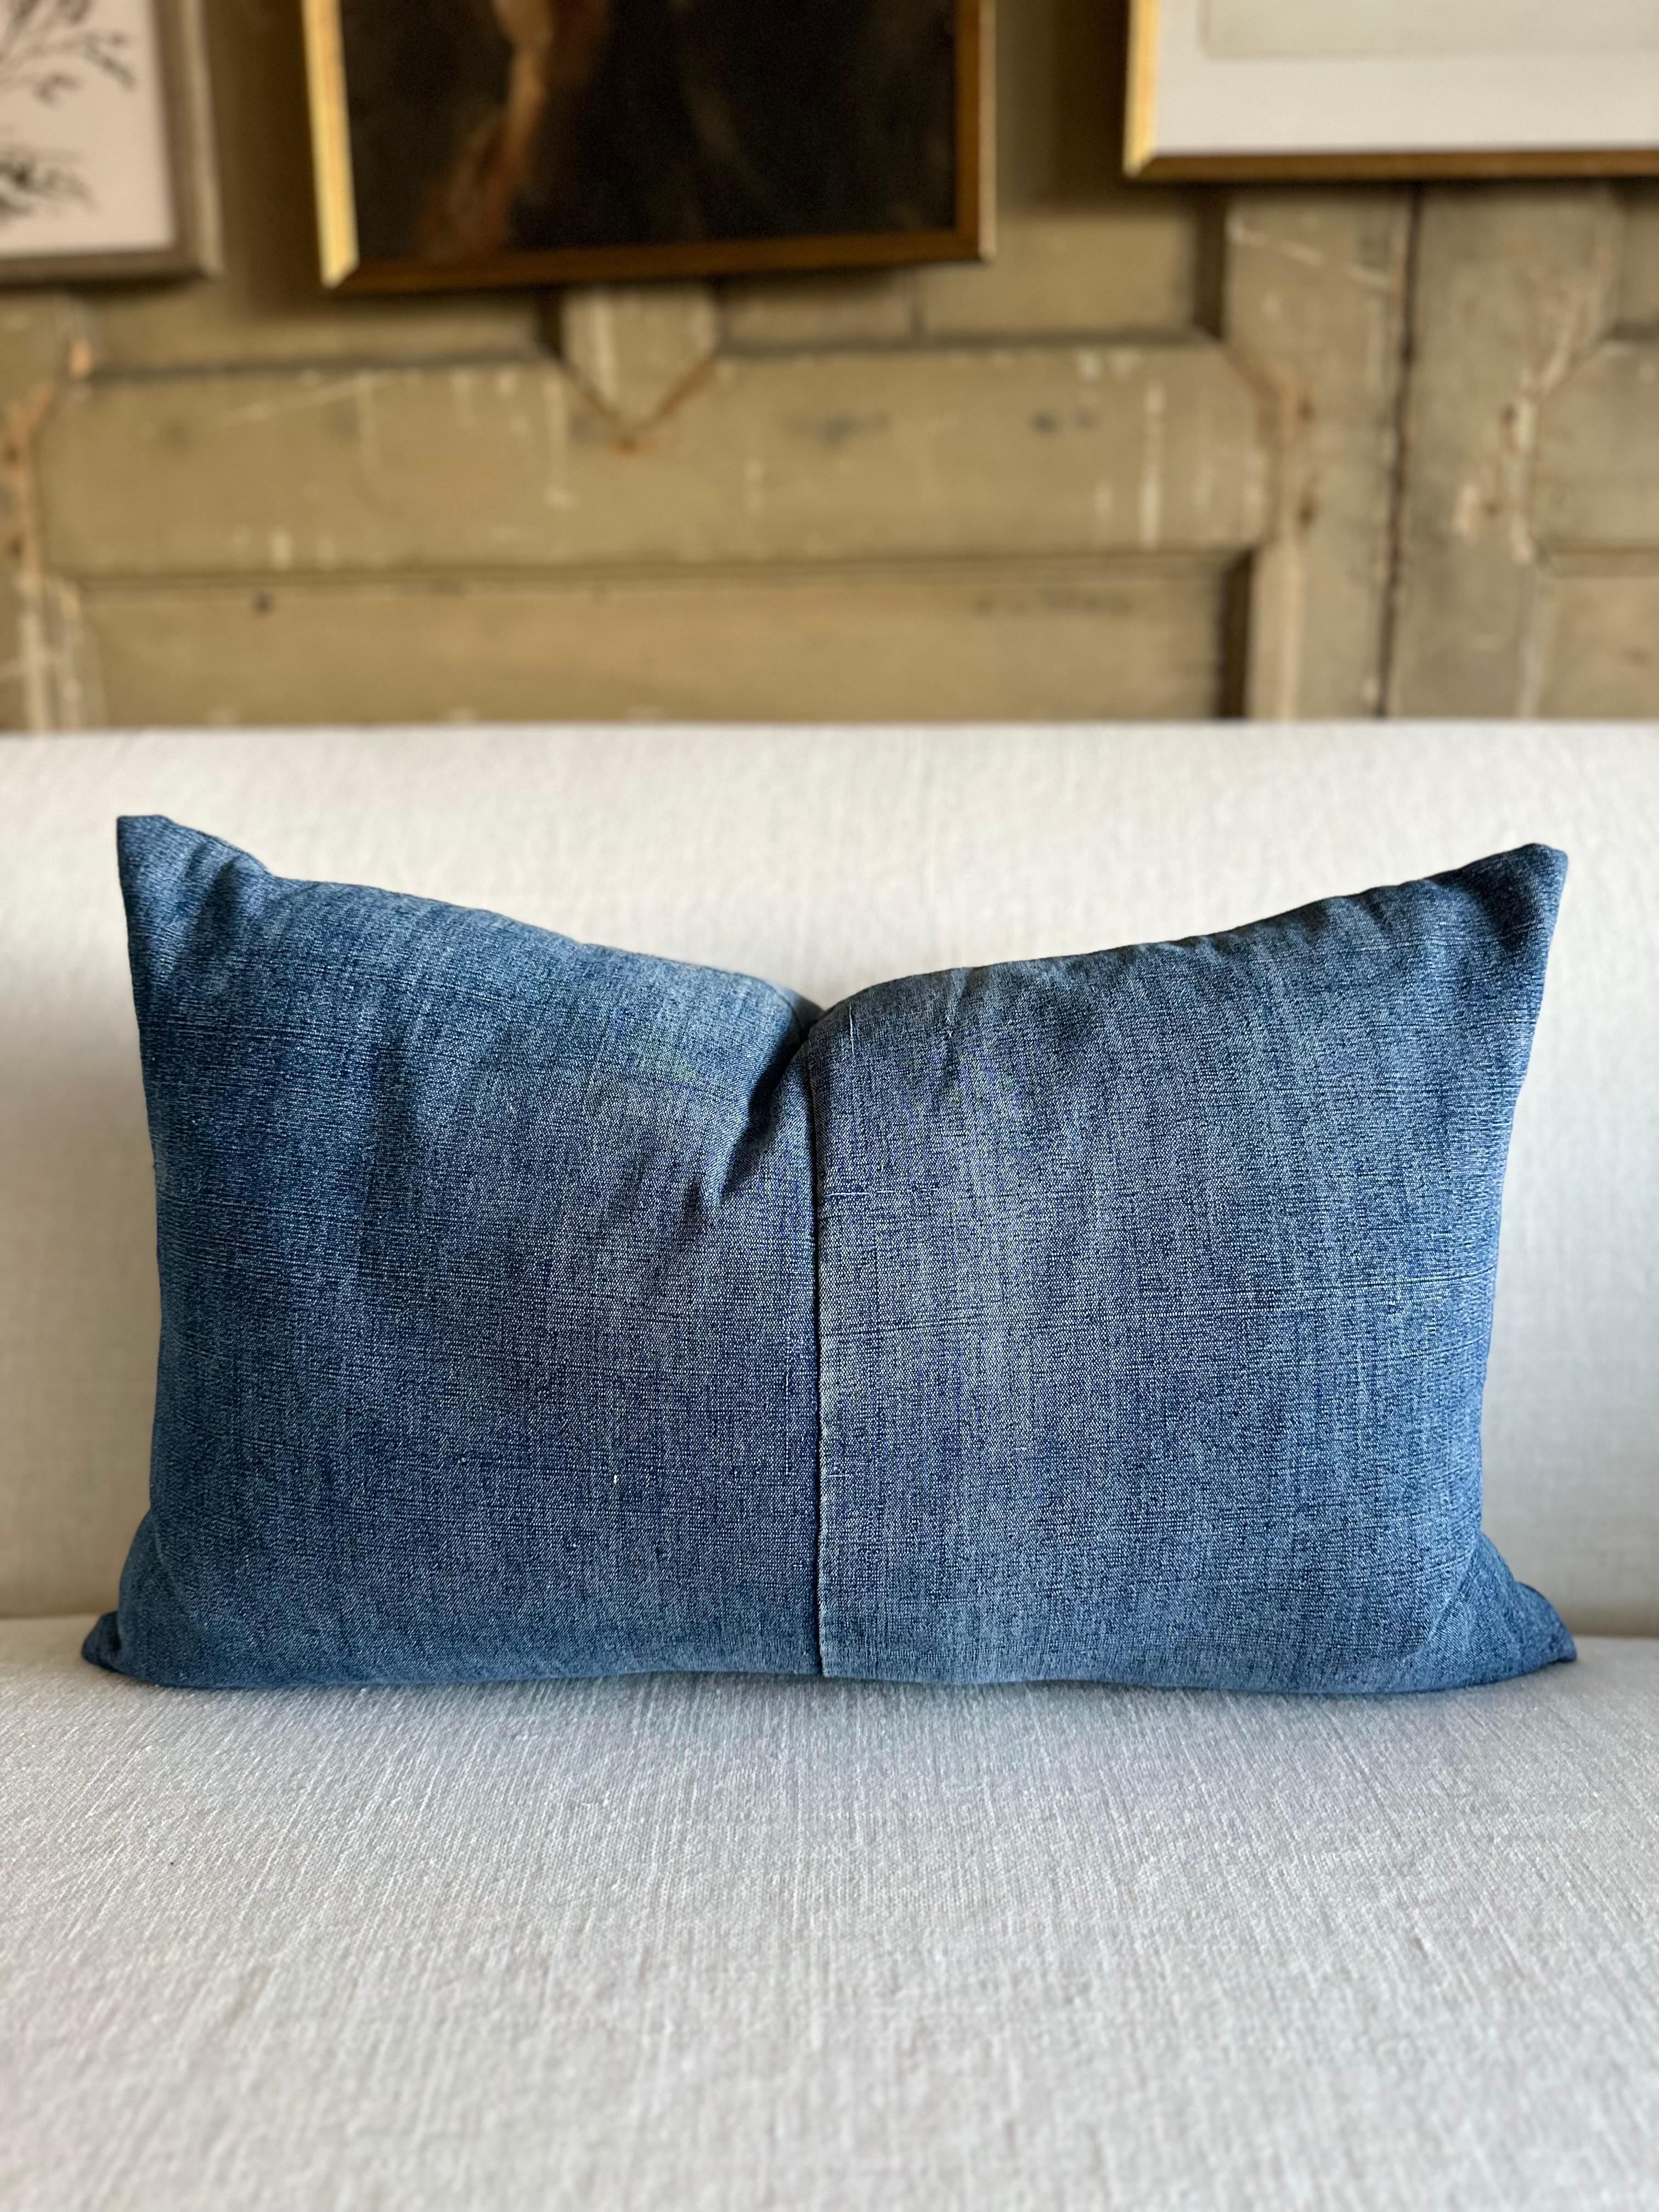 Contemporary Japanese Blue Woven Denim Style Lumbar Pillow For Sale